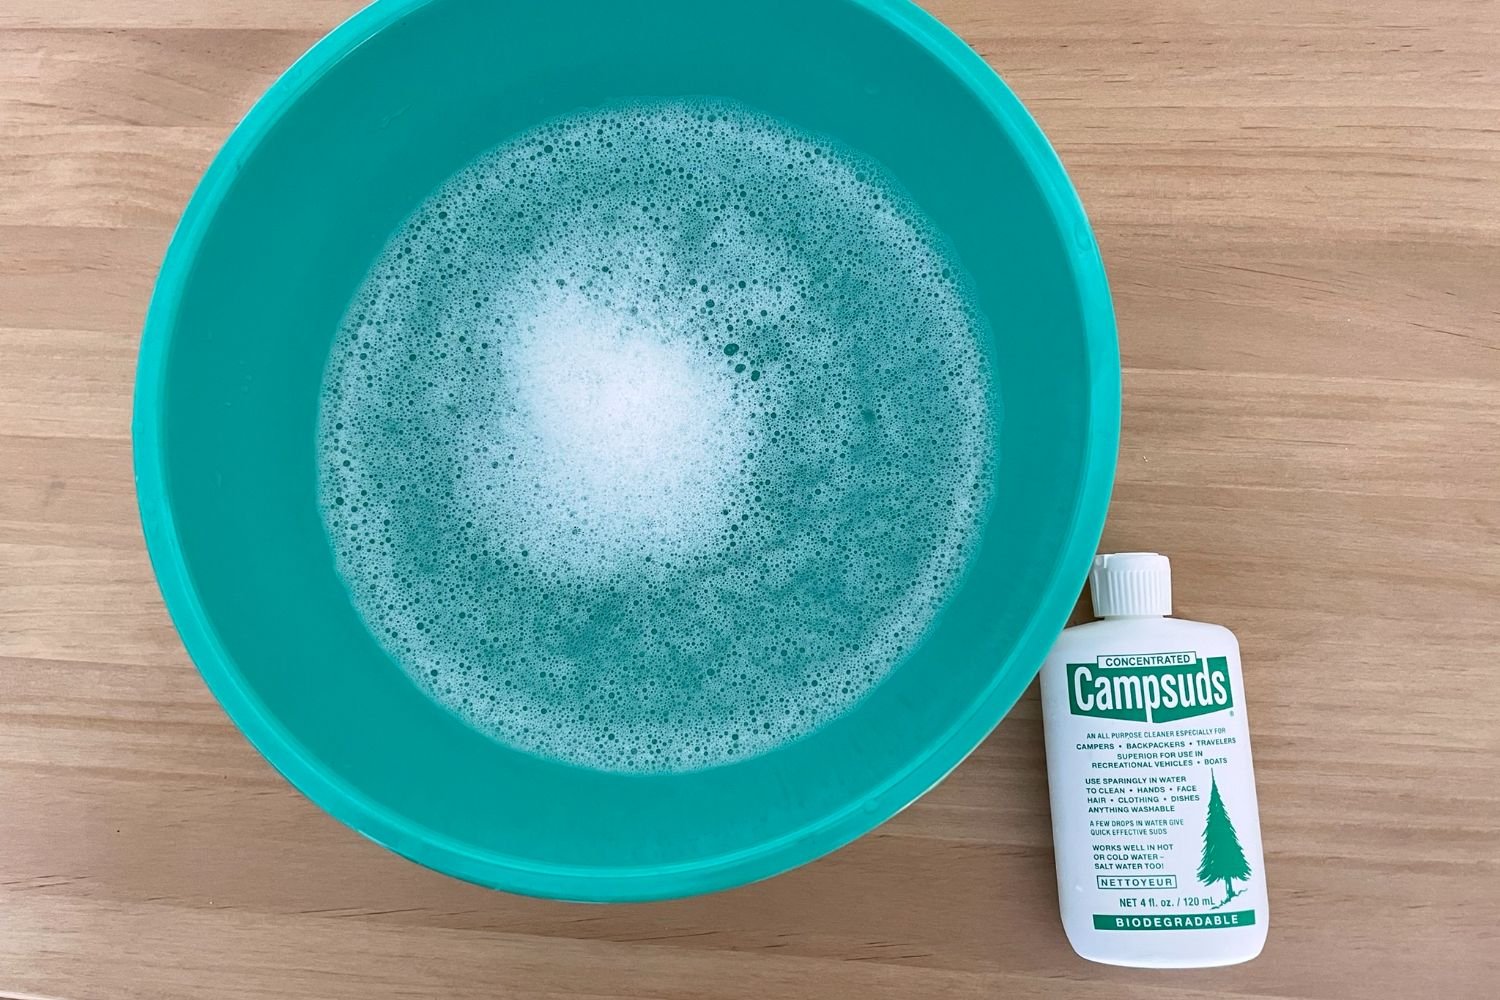  Super concentrated Campsuds lathers up more than any other option; it’s the best biodegradable soap for dealing with dirt and grime. 